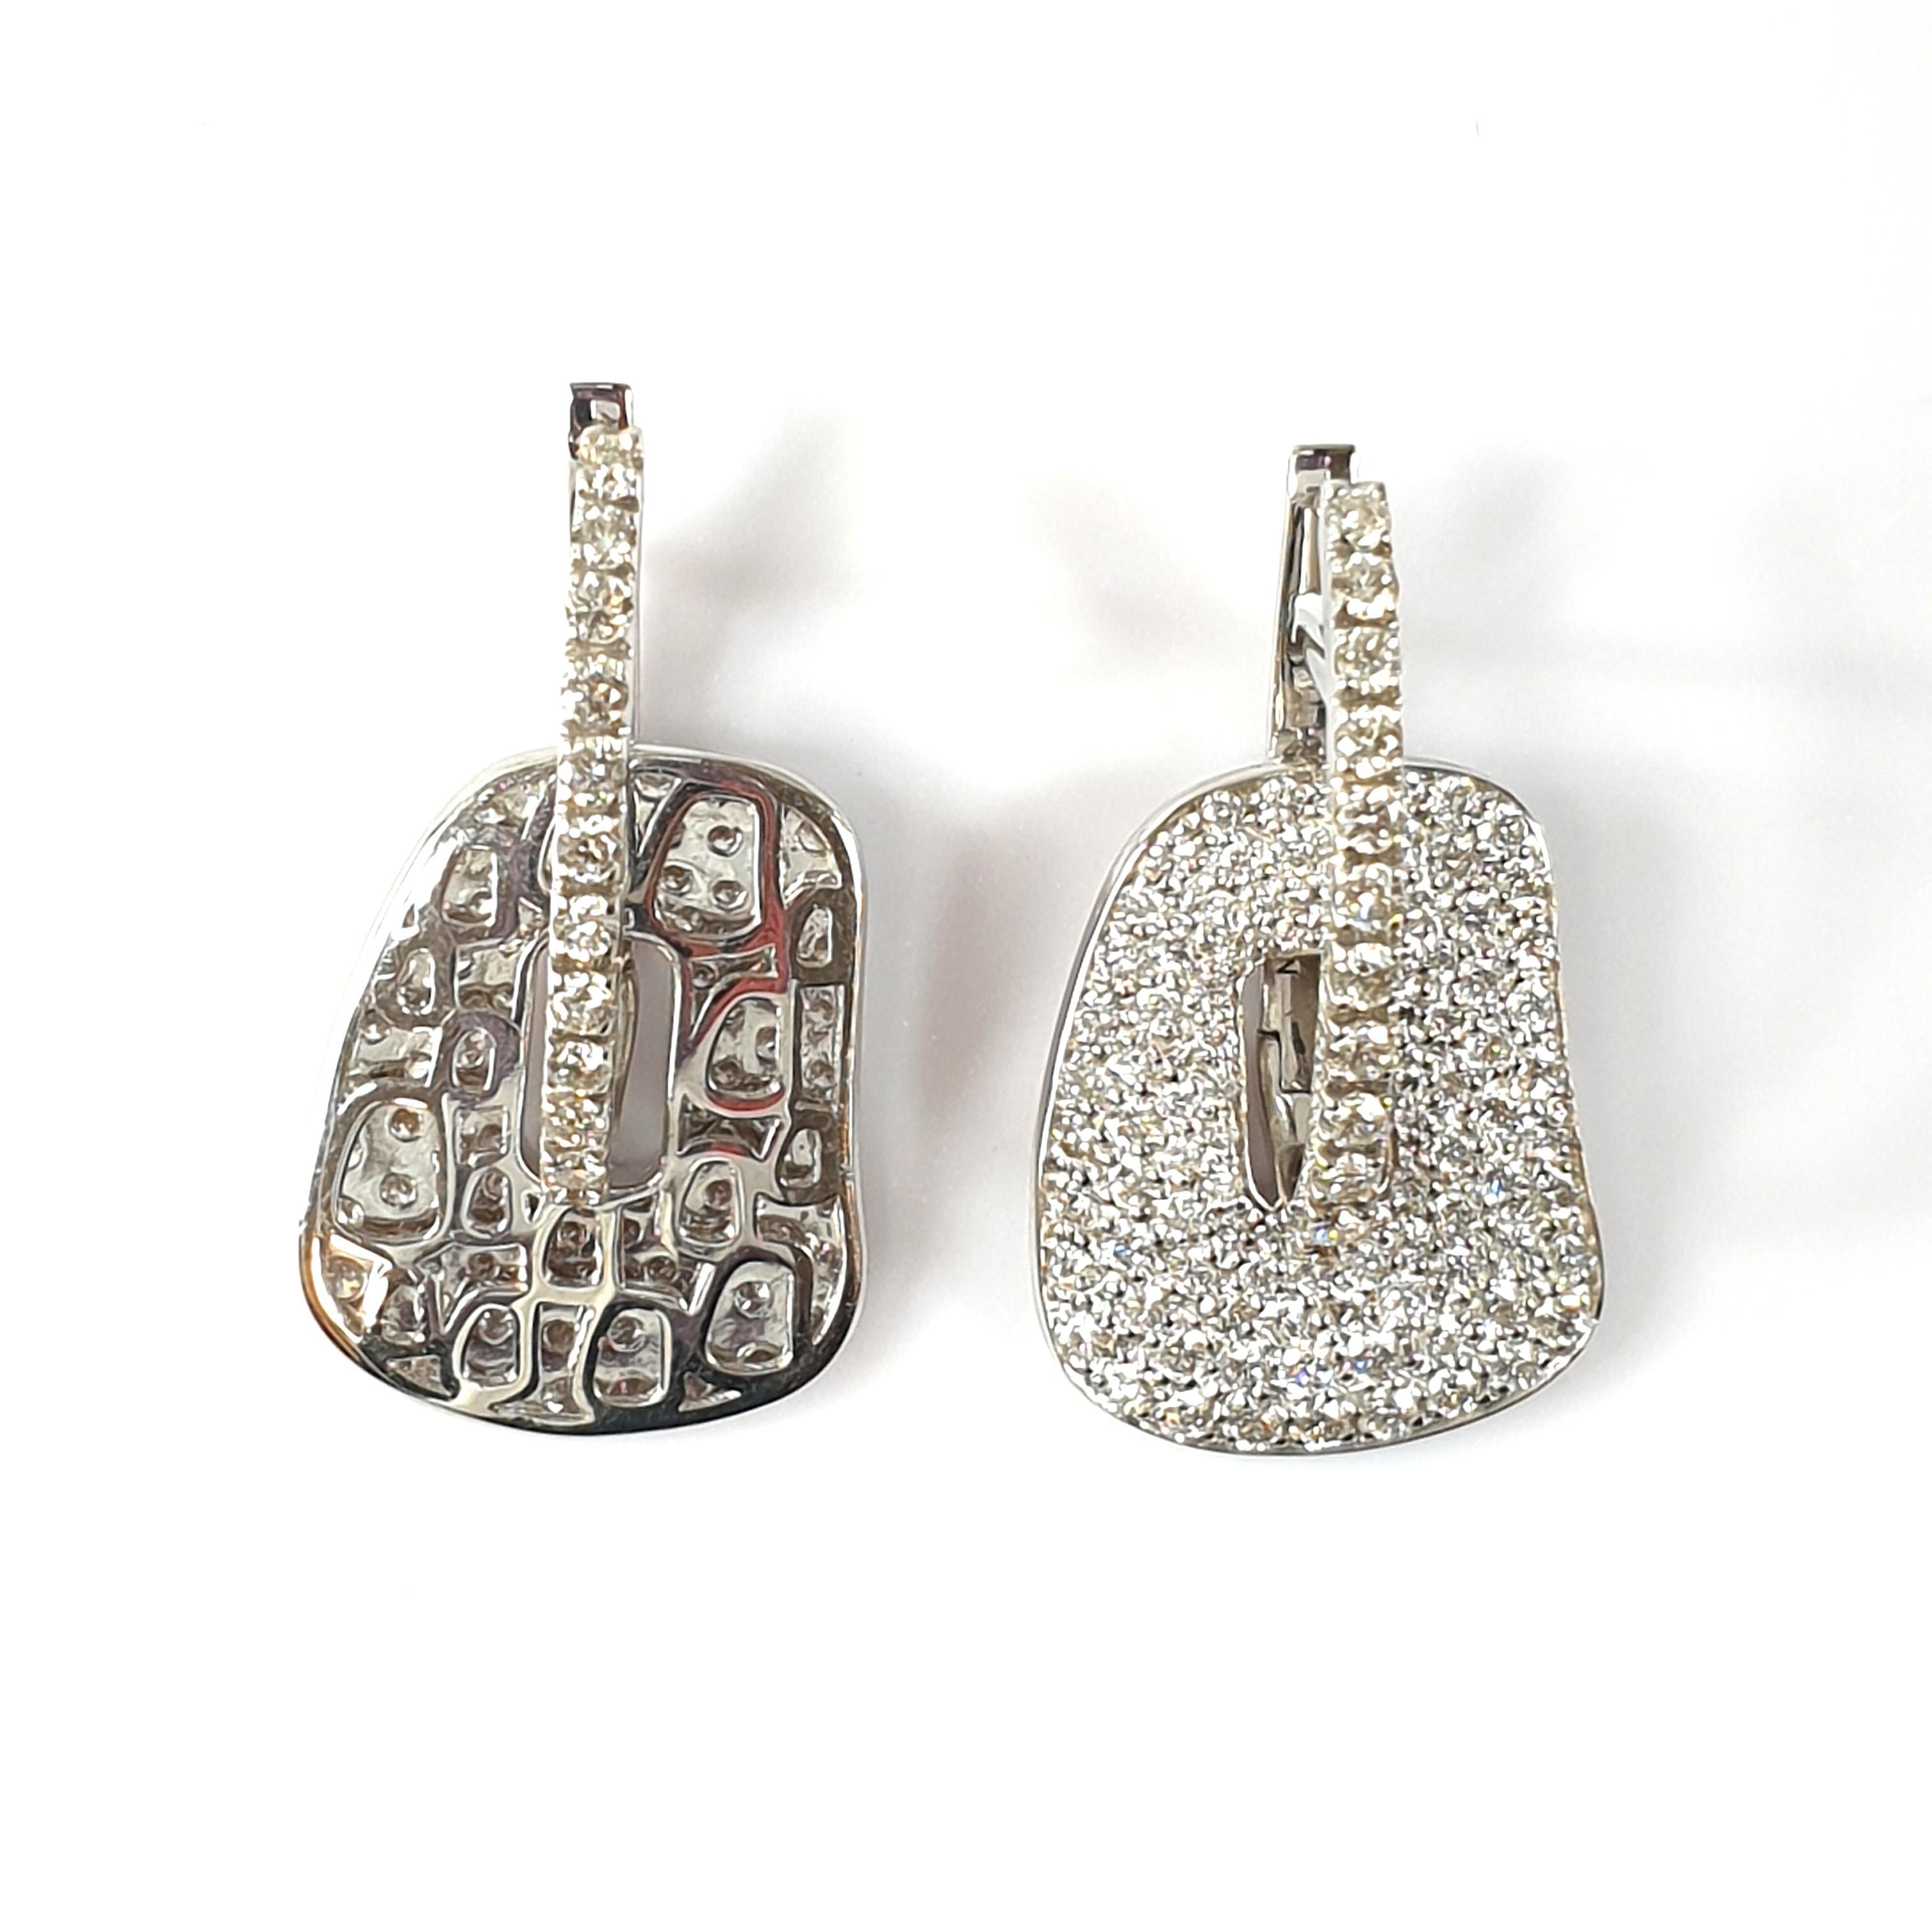 Mattioli Puzzle Pavé Earrings 18K Yello Gold & White Diamonds with 2 pairs of Colored Puzzles
Earrings in Yellow Gold
Gold Weight 08.00 grm
Diamonds 1.78ct
Measure 15x18mm or 0.59x0.70 in
Also Available in White and Rose Gold & Brown Diamonds

READY